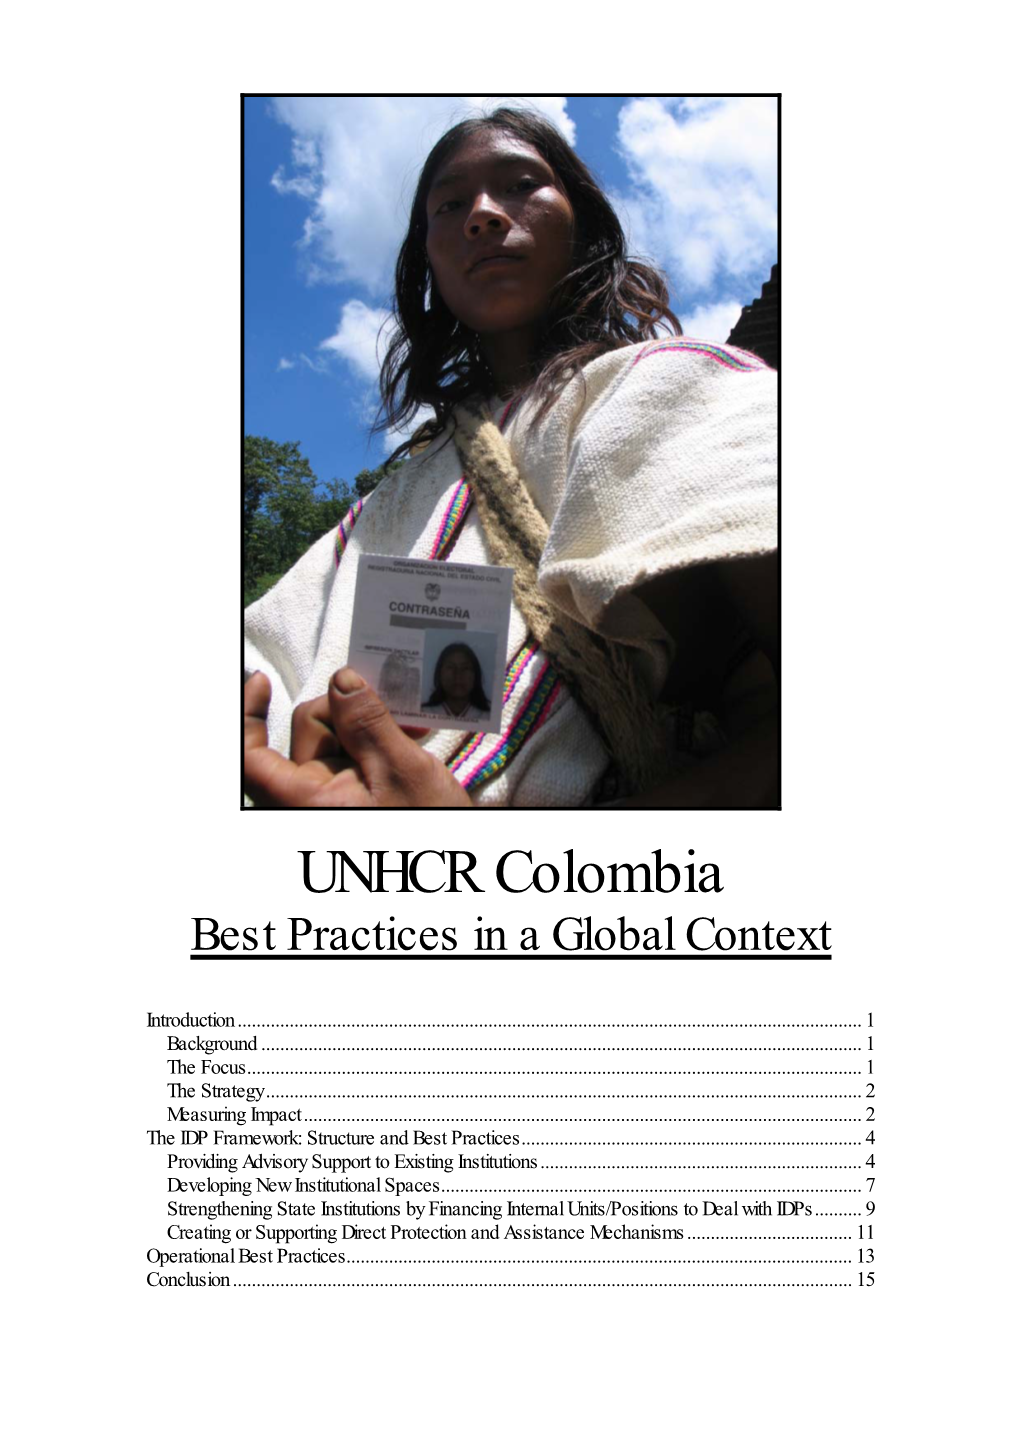 UNHCR Colombia Best Practices in a Global Context